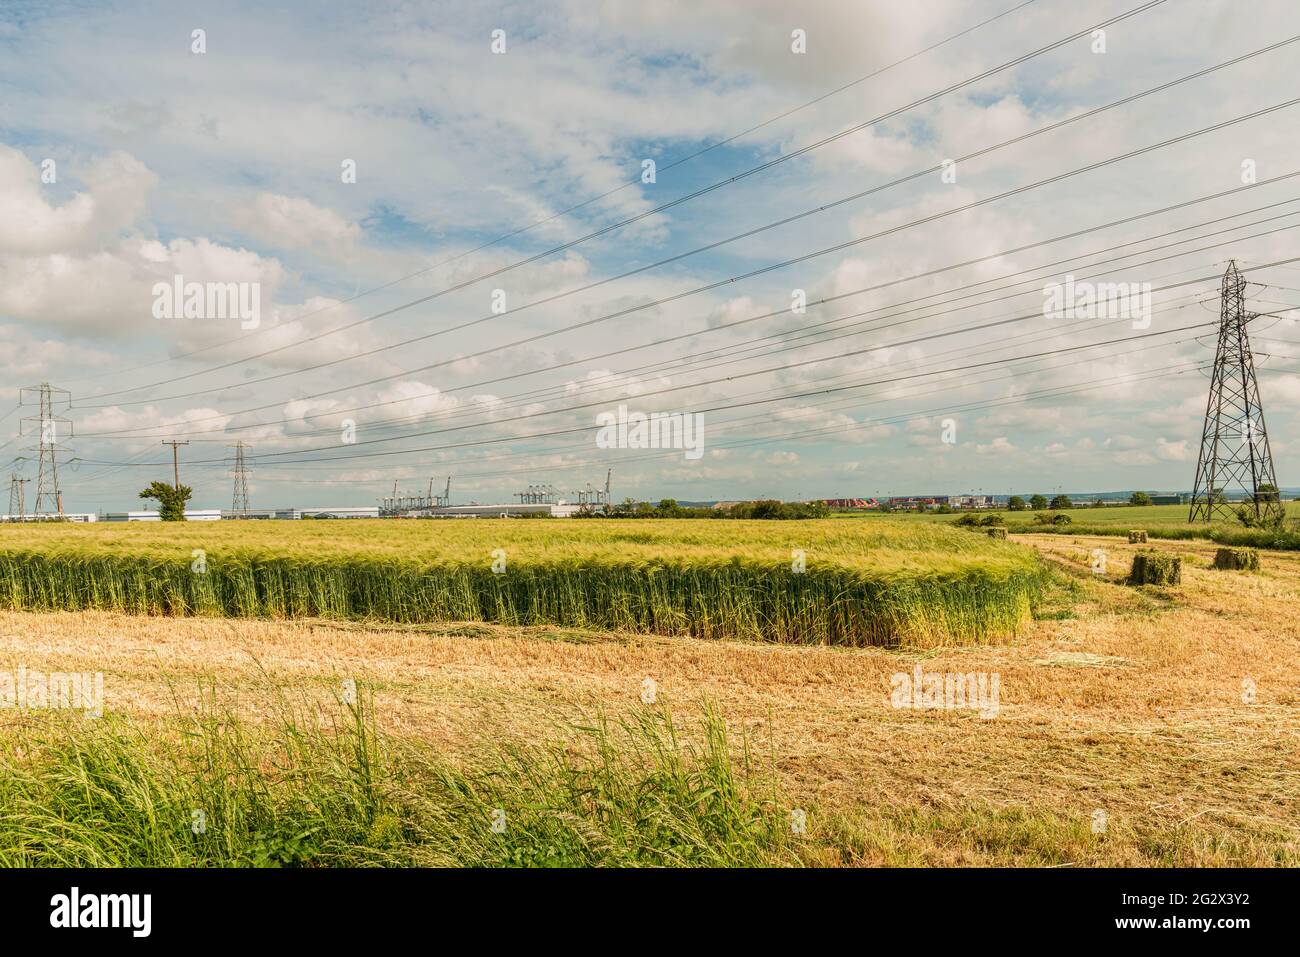 Harvest time in the Essex U.K. Stock Photo